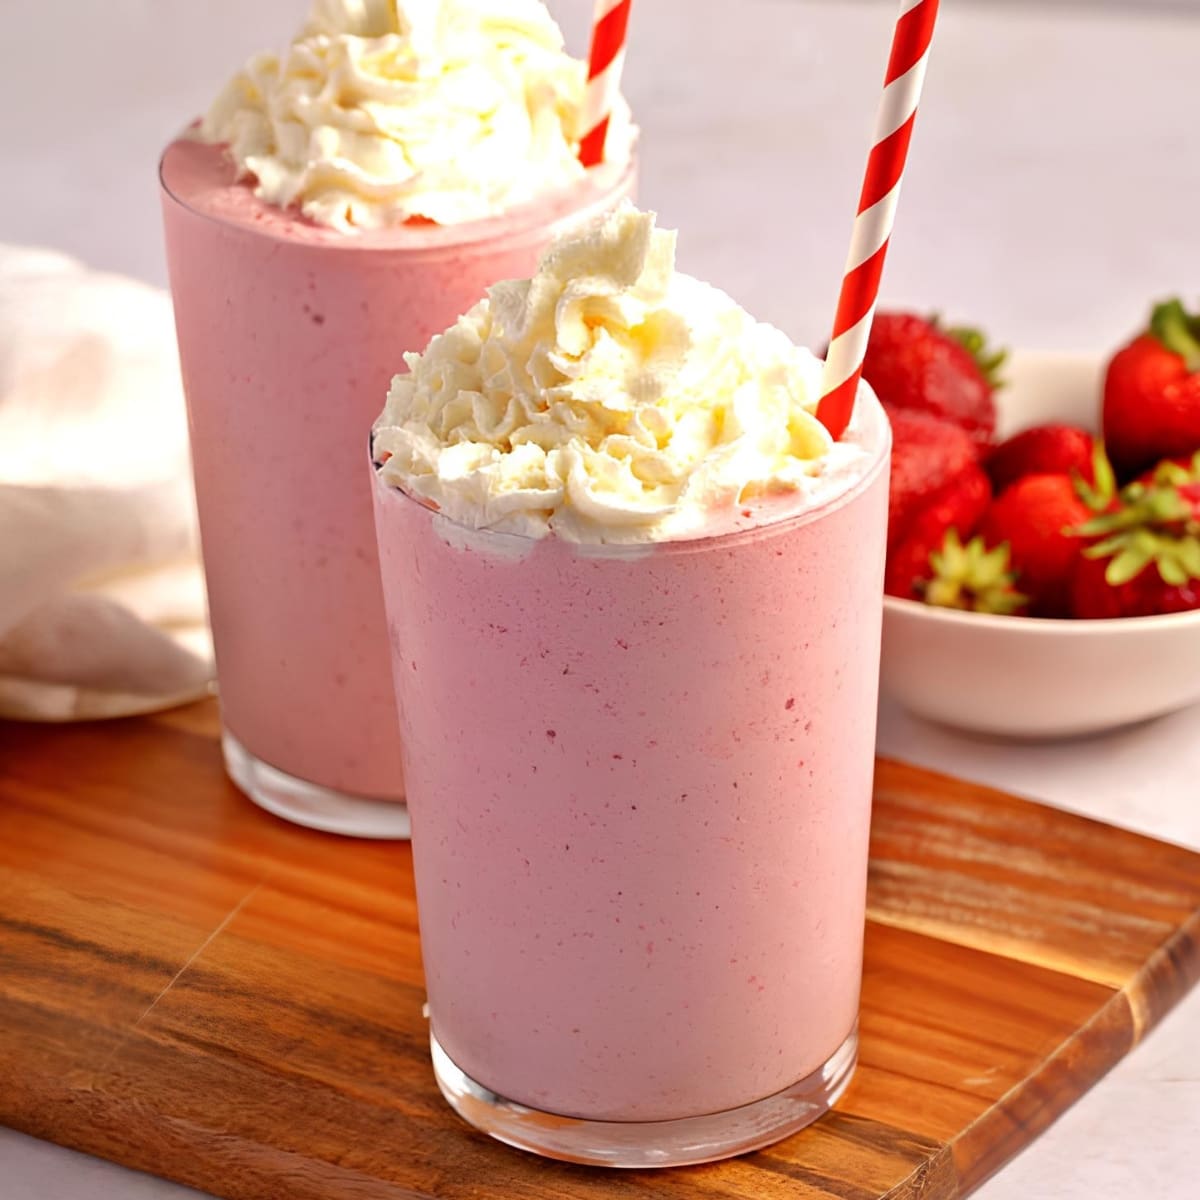 Strawberry smoothie on glasses topped with whipped cream.